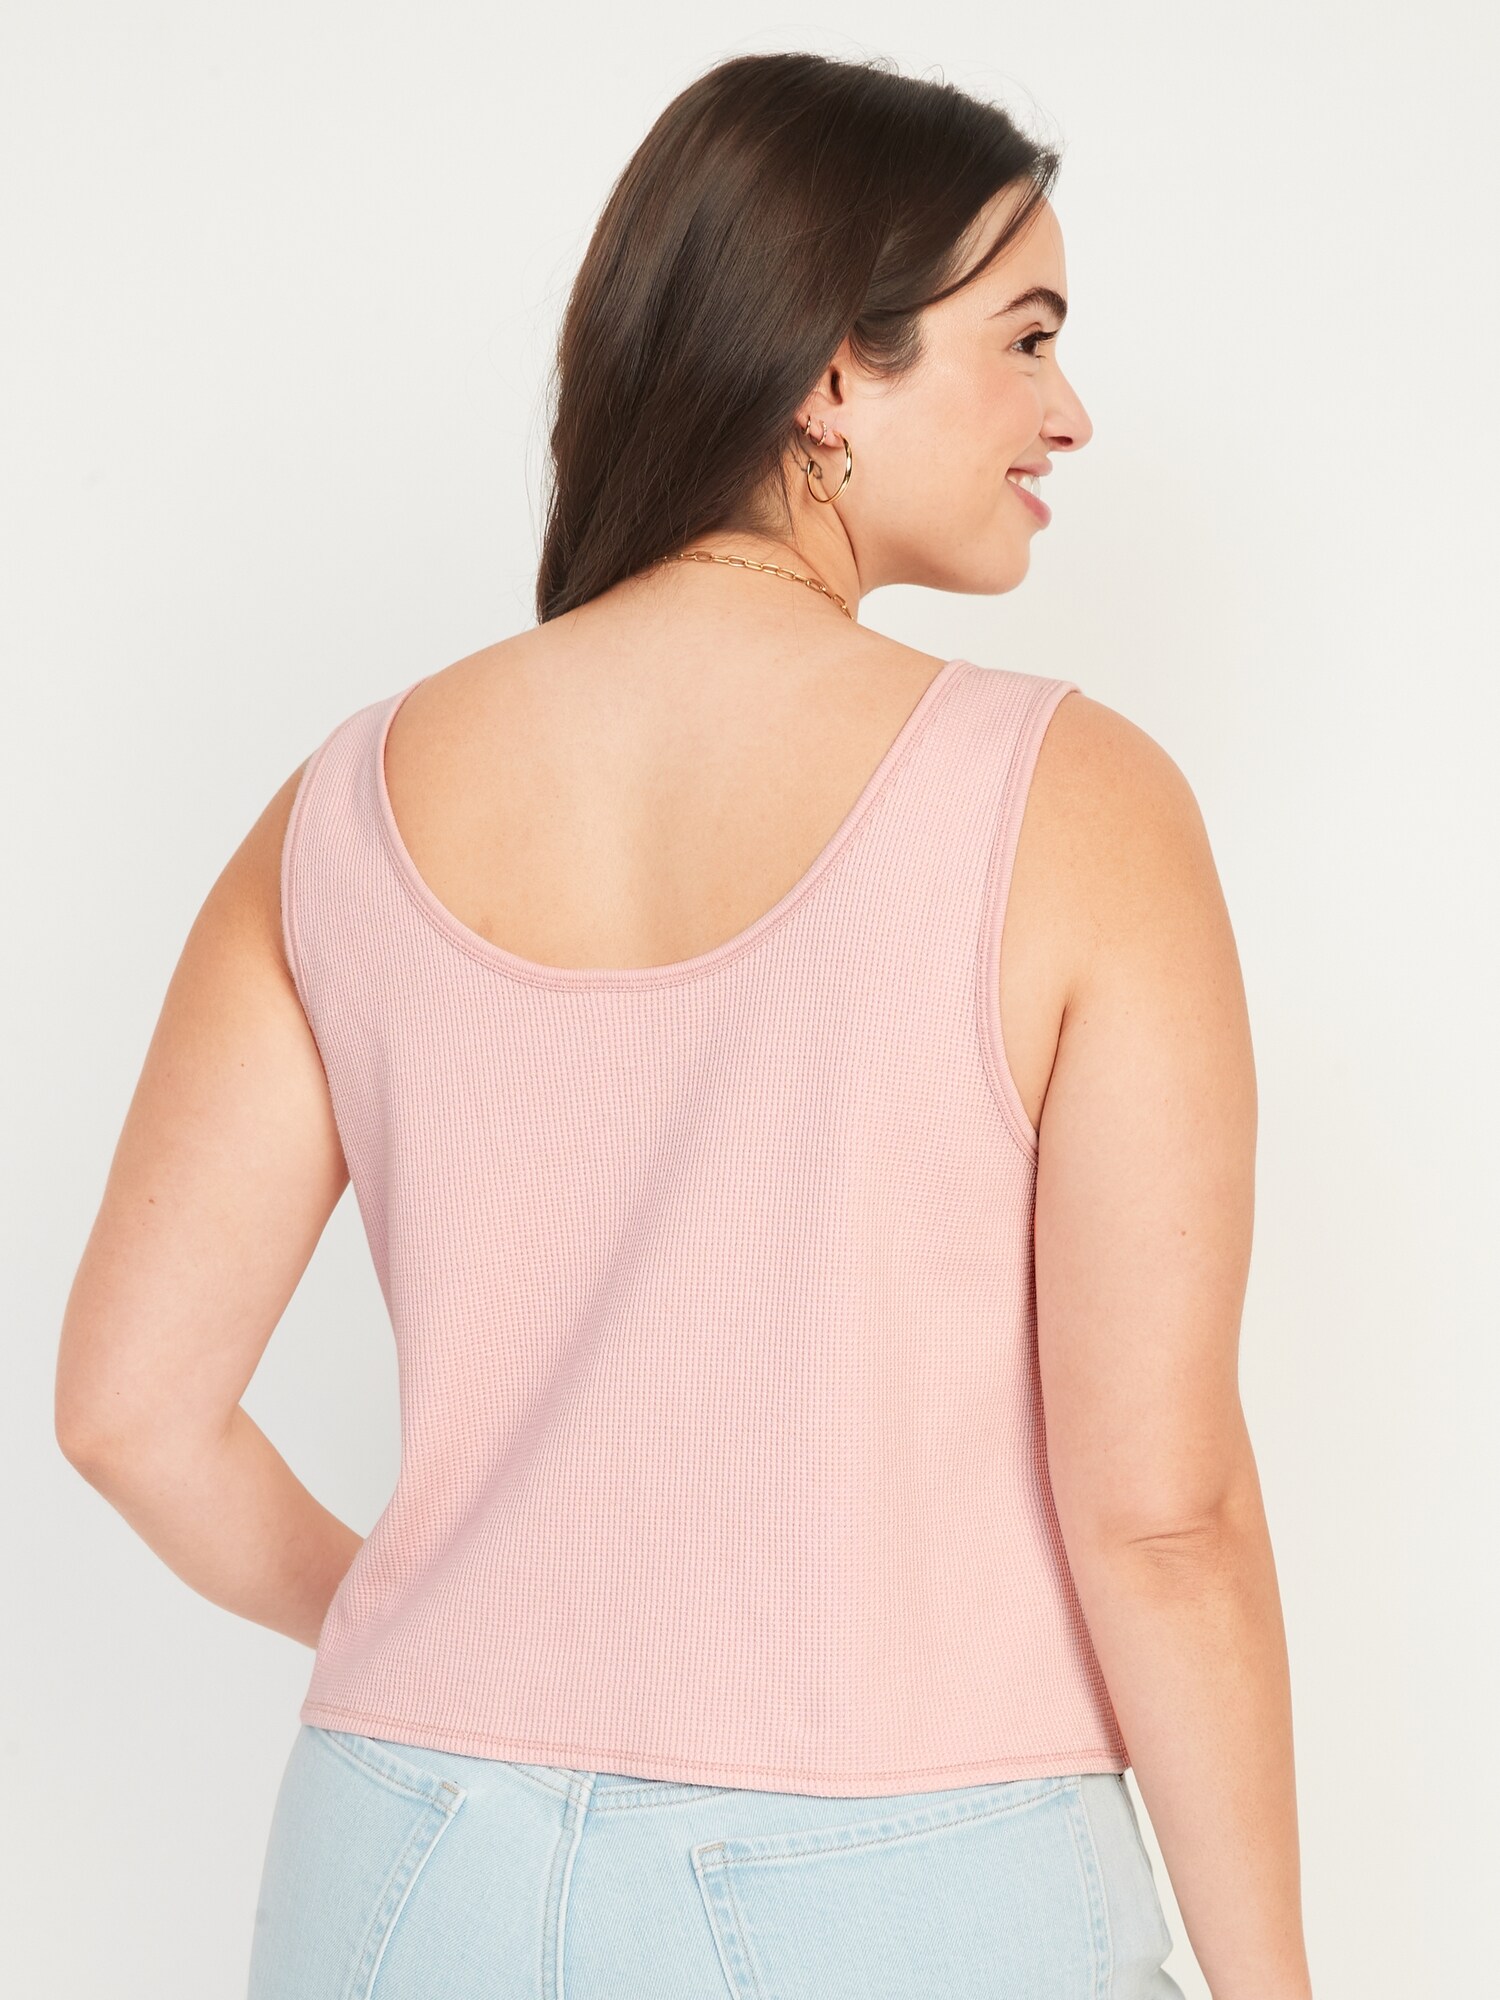 Everbellus Womens Sexy Basic Solid Tank Top Spaghetti Strap